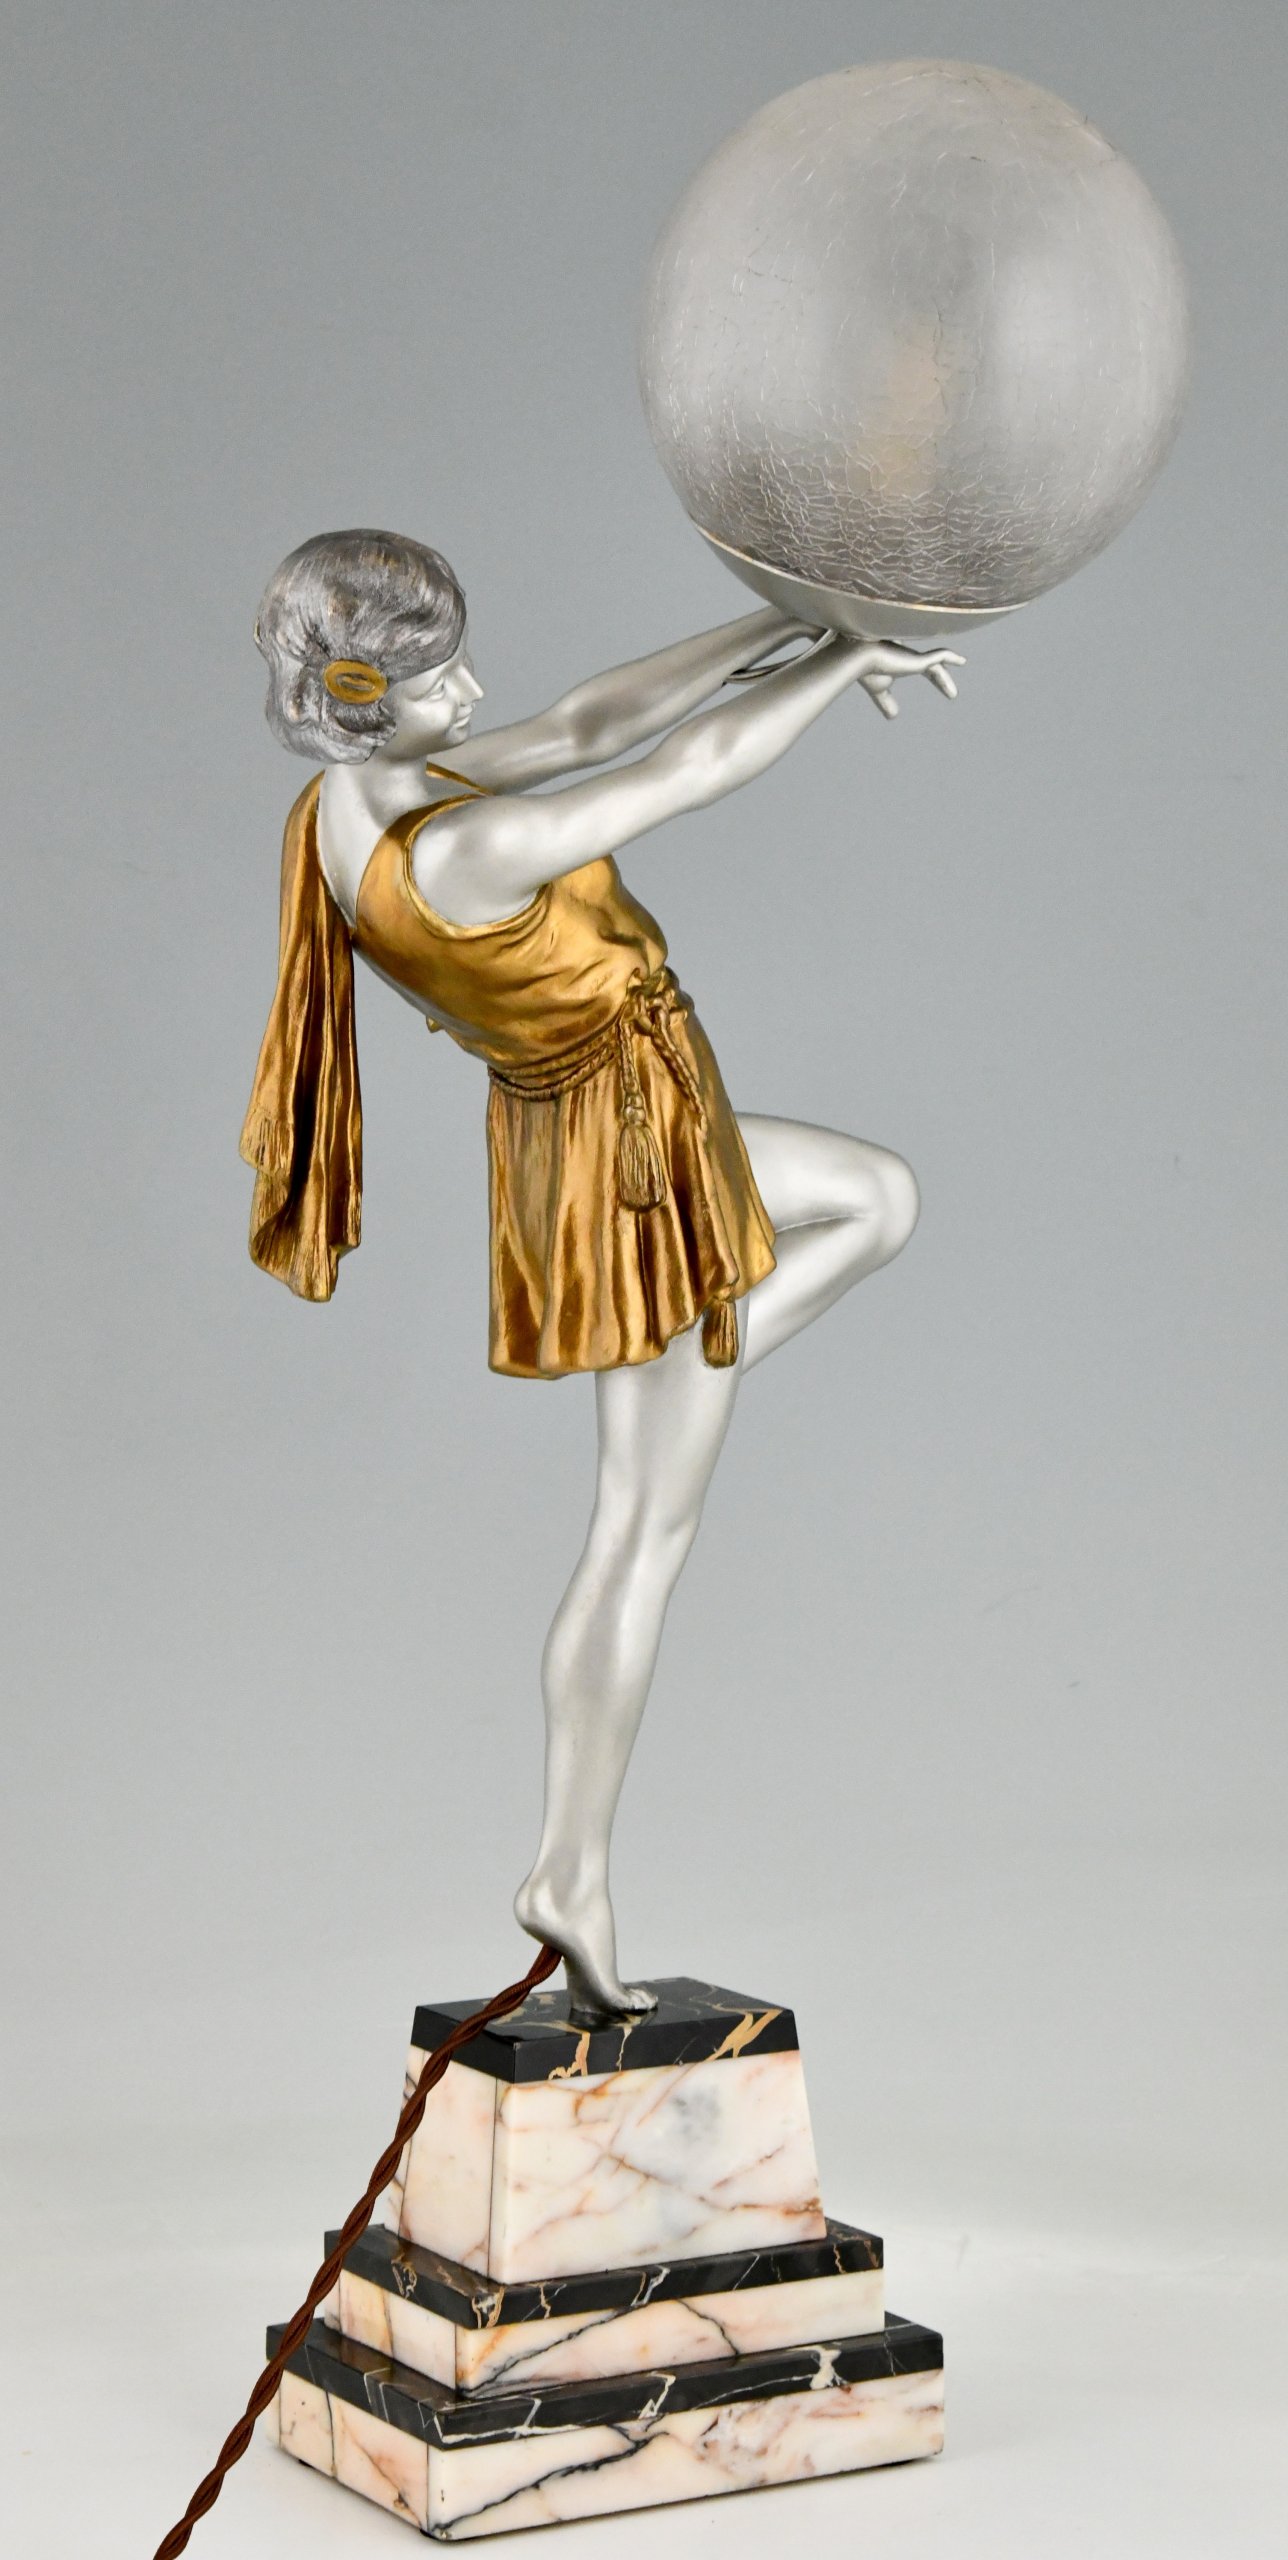 Art Deco lamp lady holding a ball.